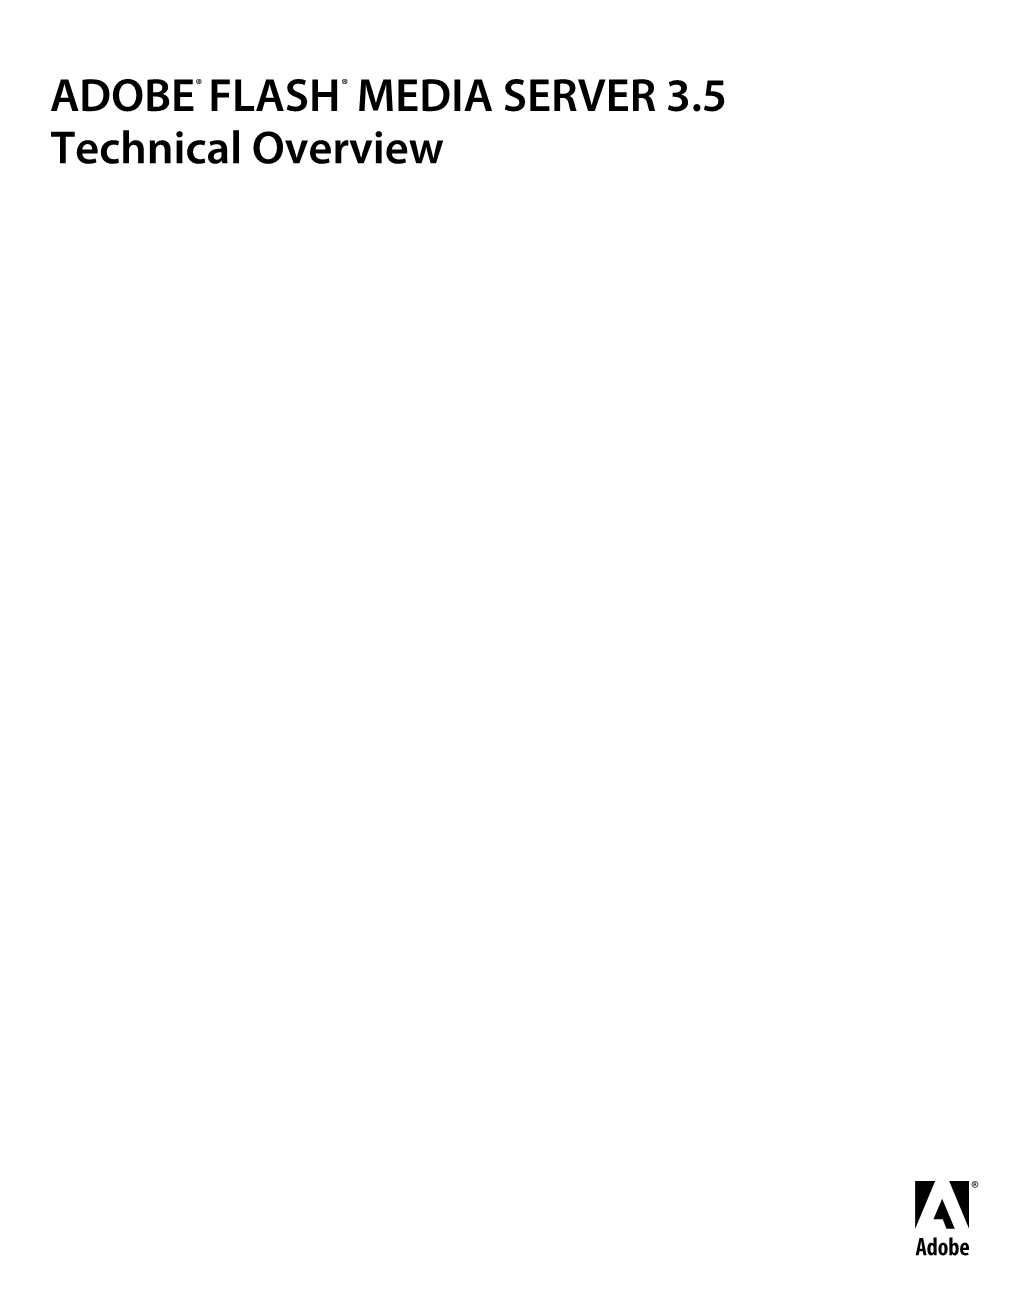 ADOBE® FLASH® MEDIA SERVER 3.5 Technical Overview ©Copyright 2009 Adobe Systems Incorporated